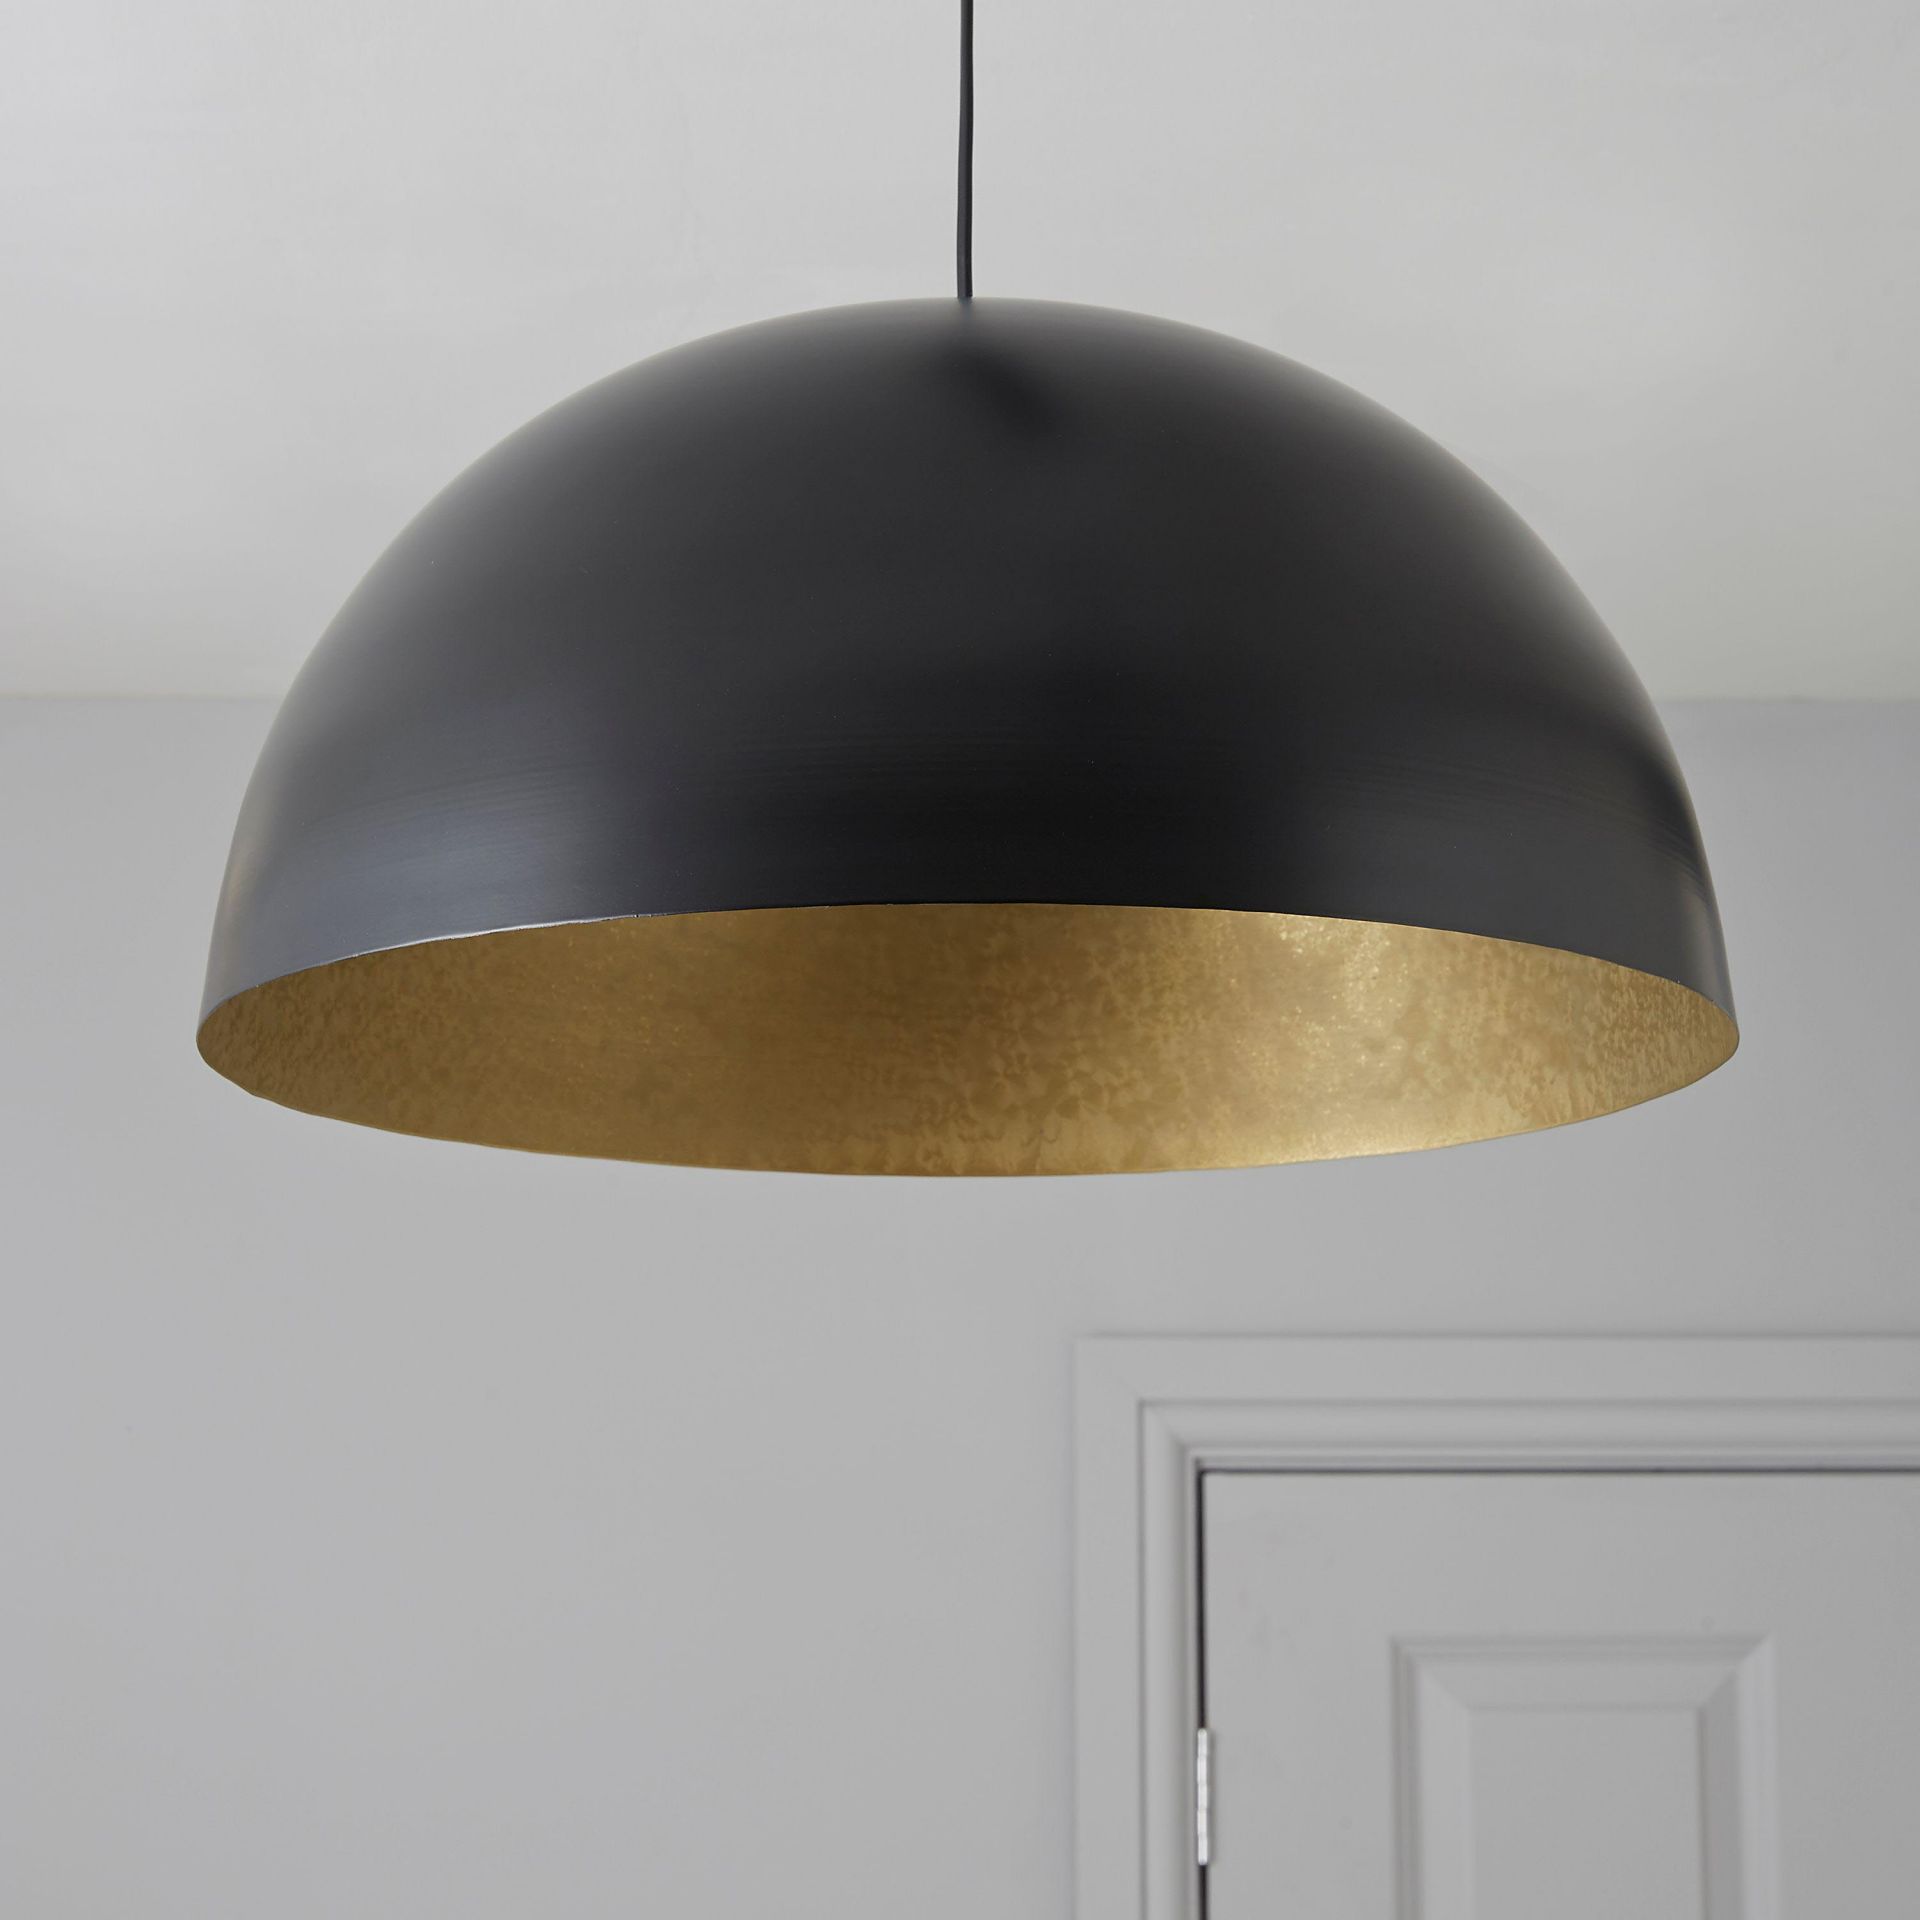 Copper Dome Ceiling Light